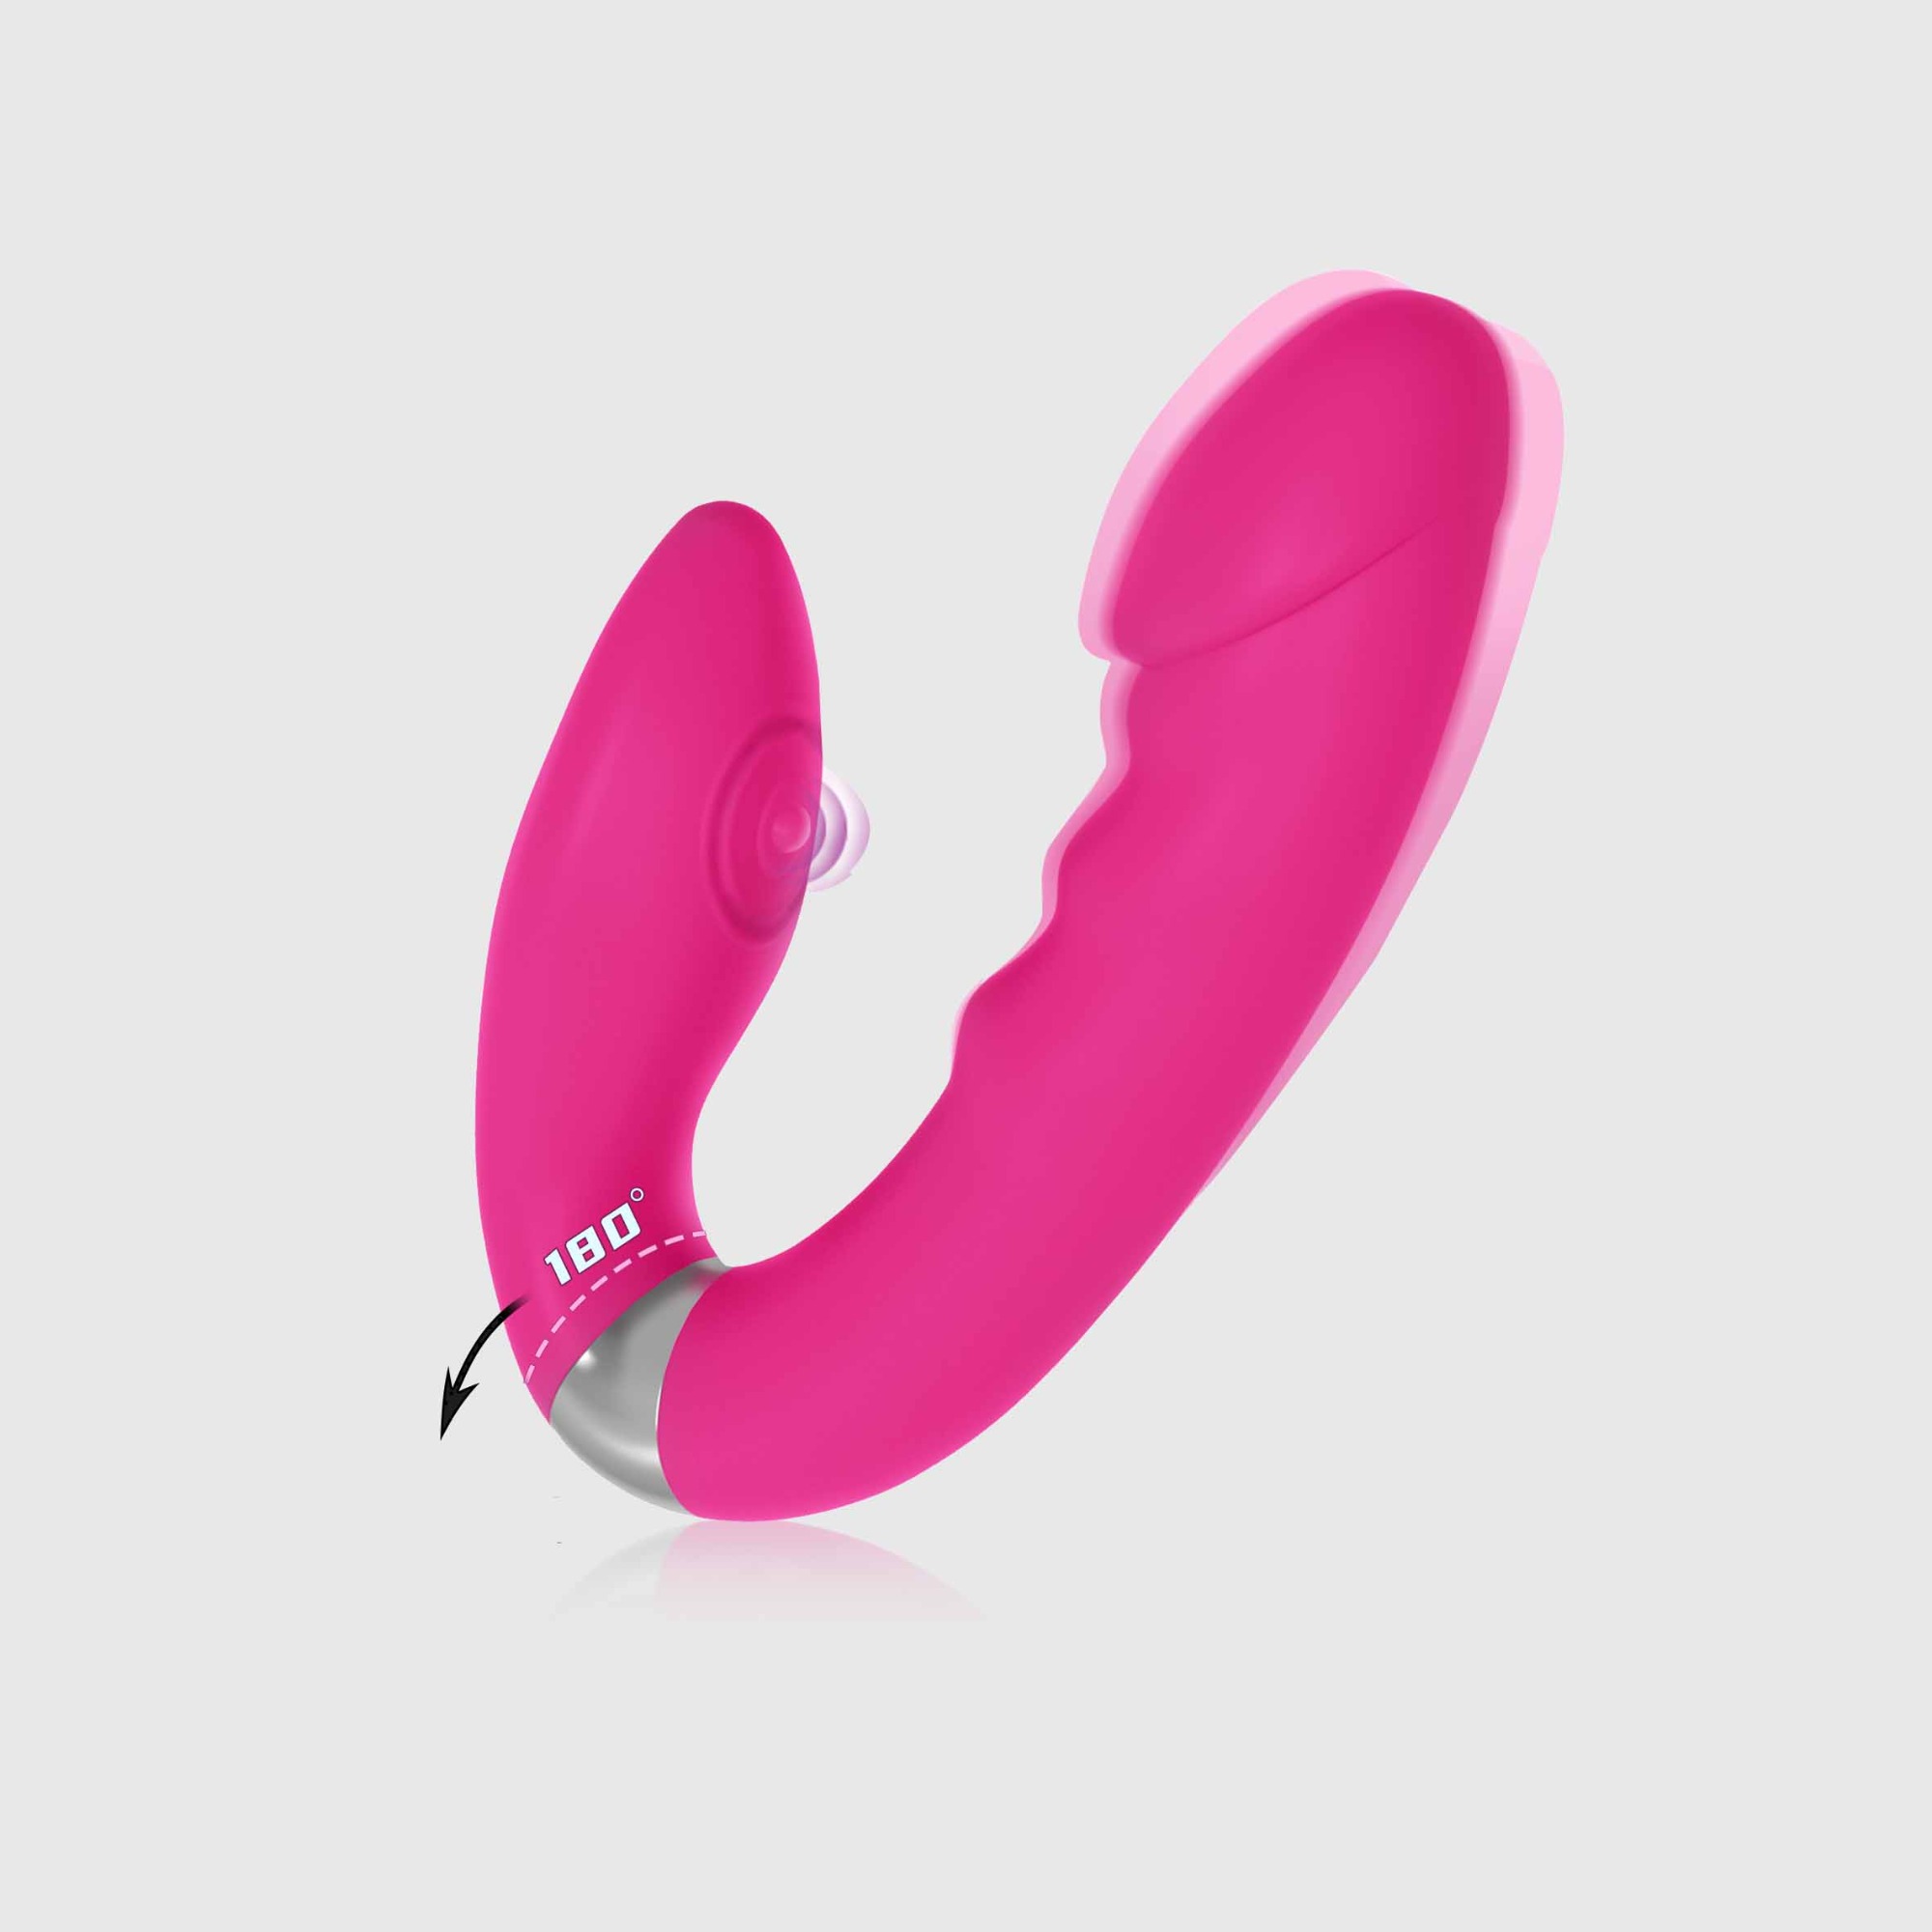 NEW 180 Degree Transformation Realistic Vibrating and Clit Flapping Sex Toy Vibrator Dildo